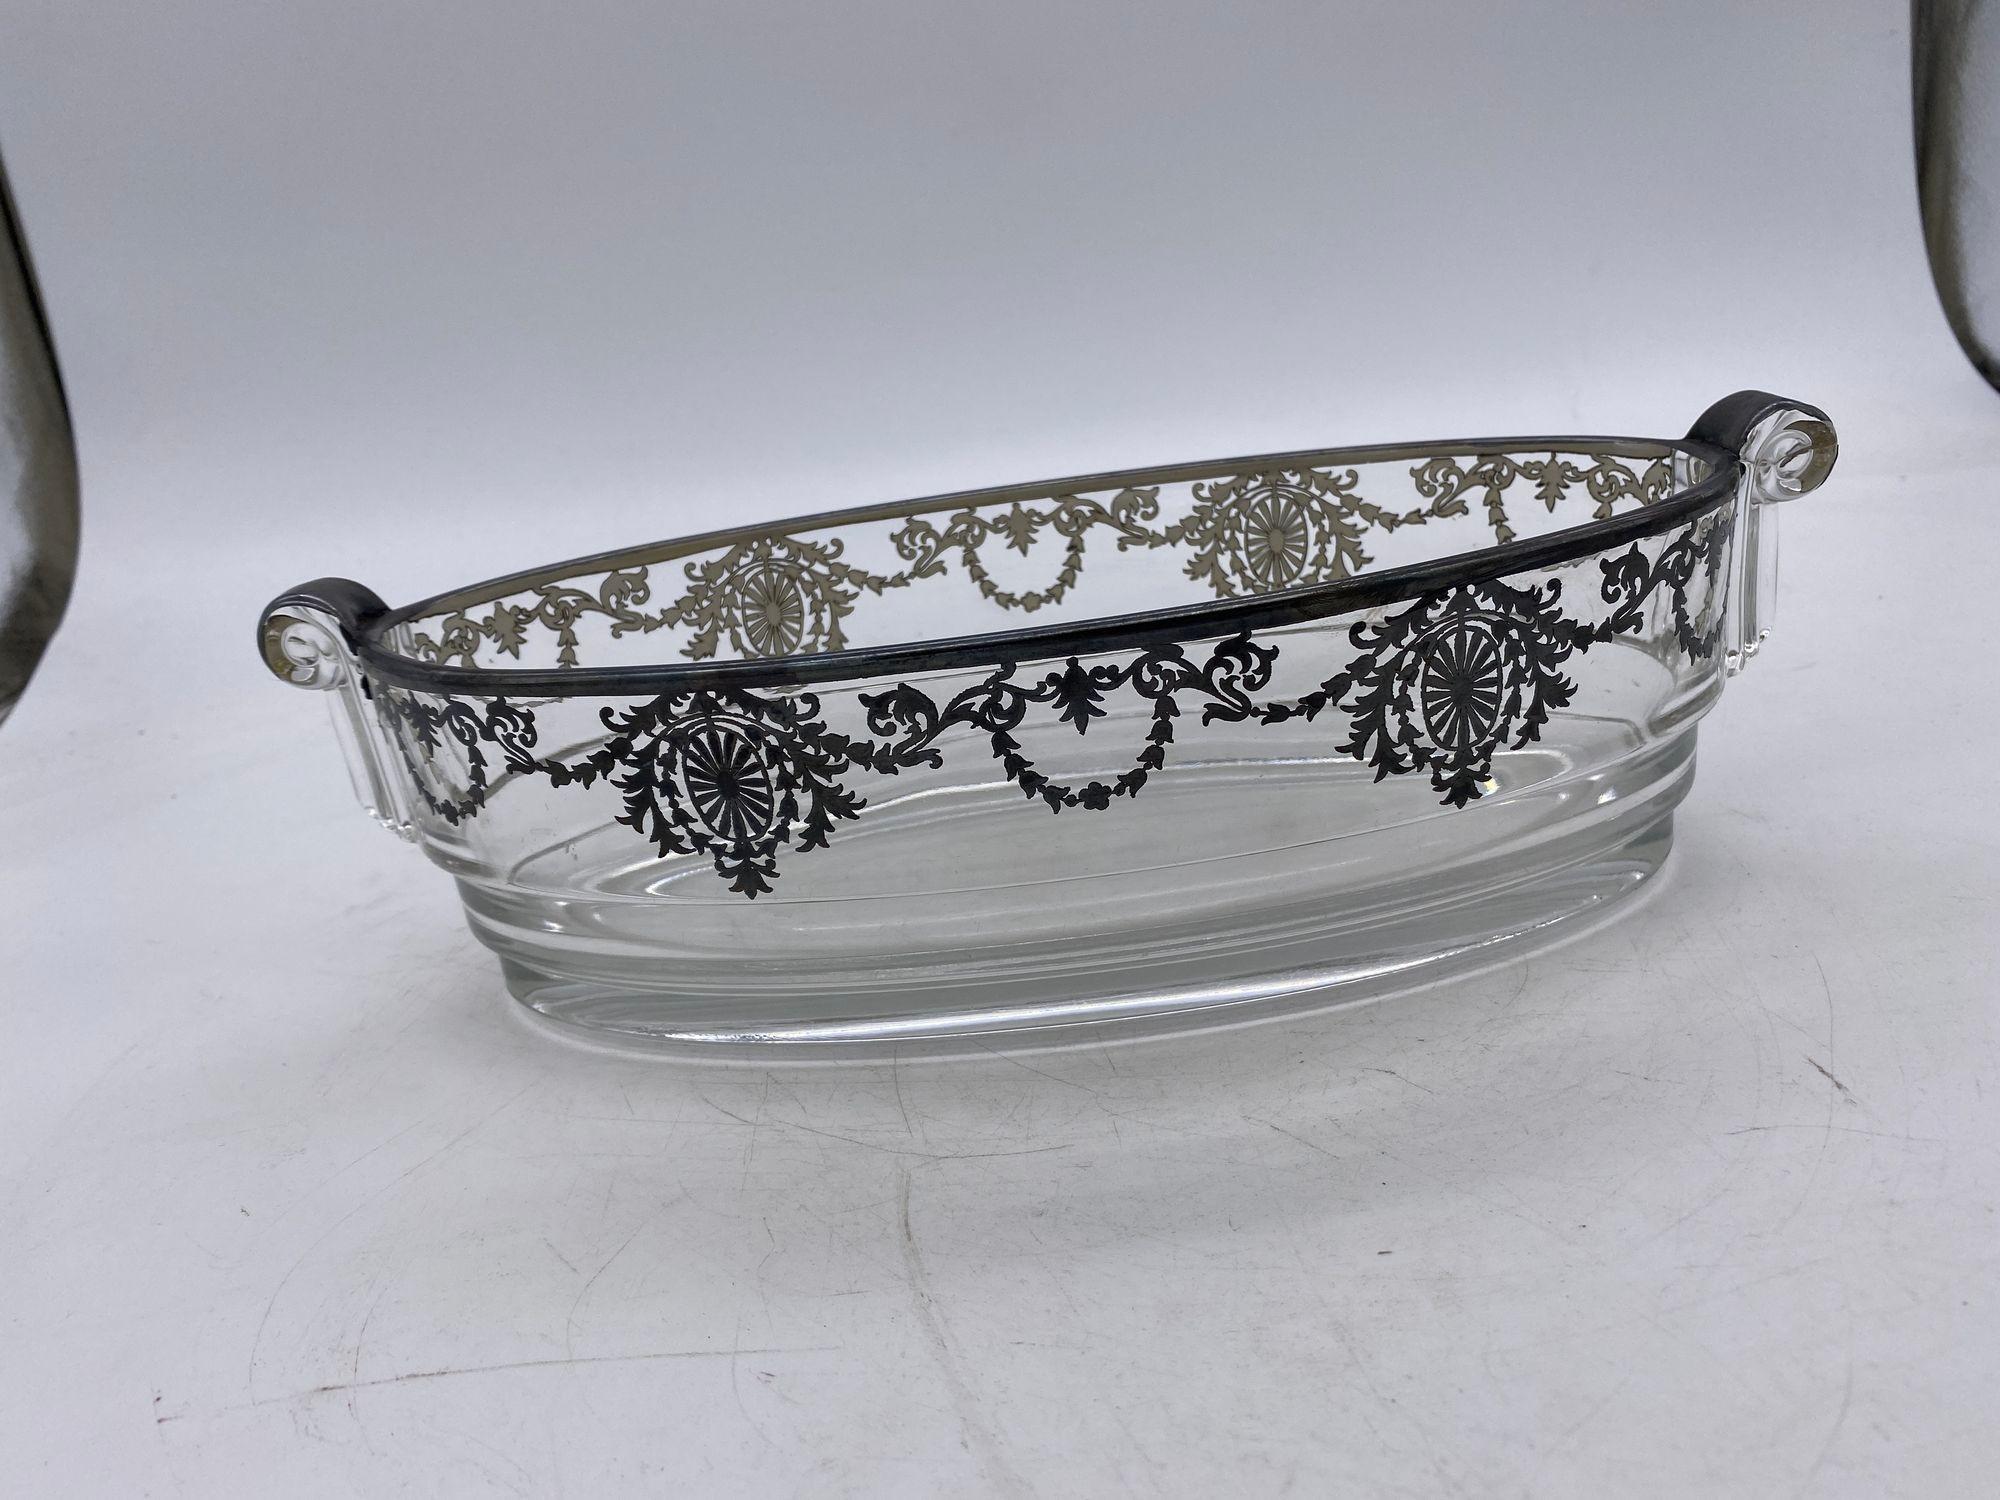 Art Deco High Style Silver Overlay Glass Serving Bowl Scrolling Handles In Excellent Condition For Sale In Van Nuys, CA